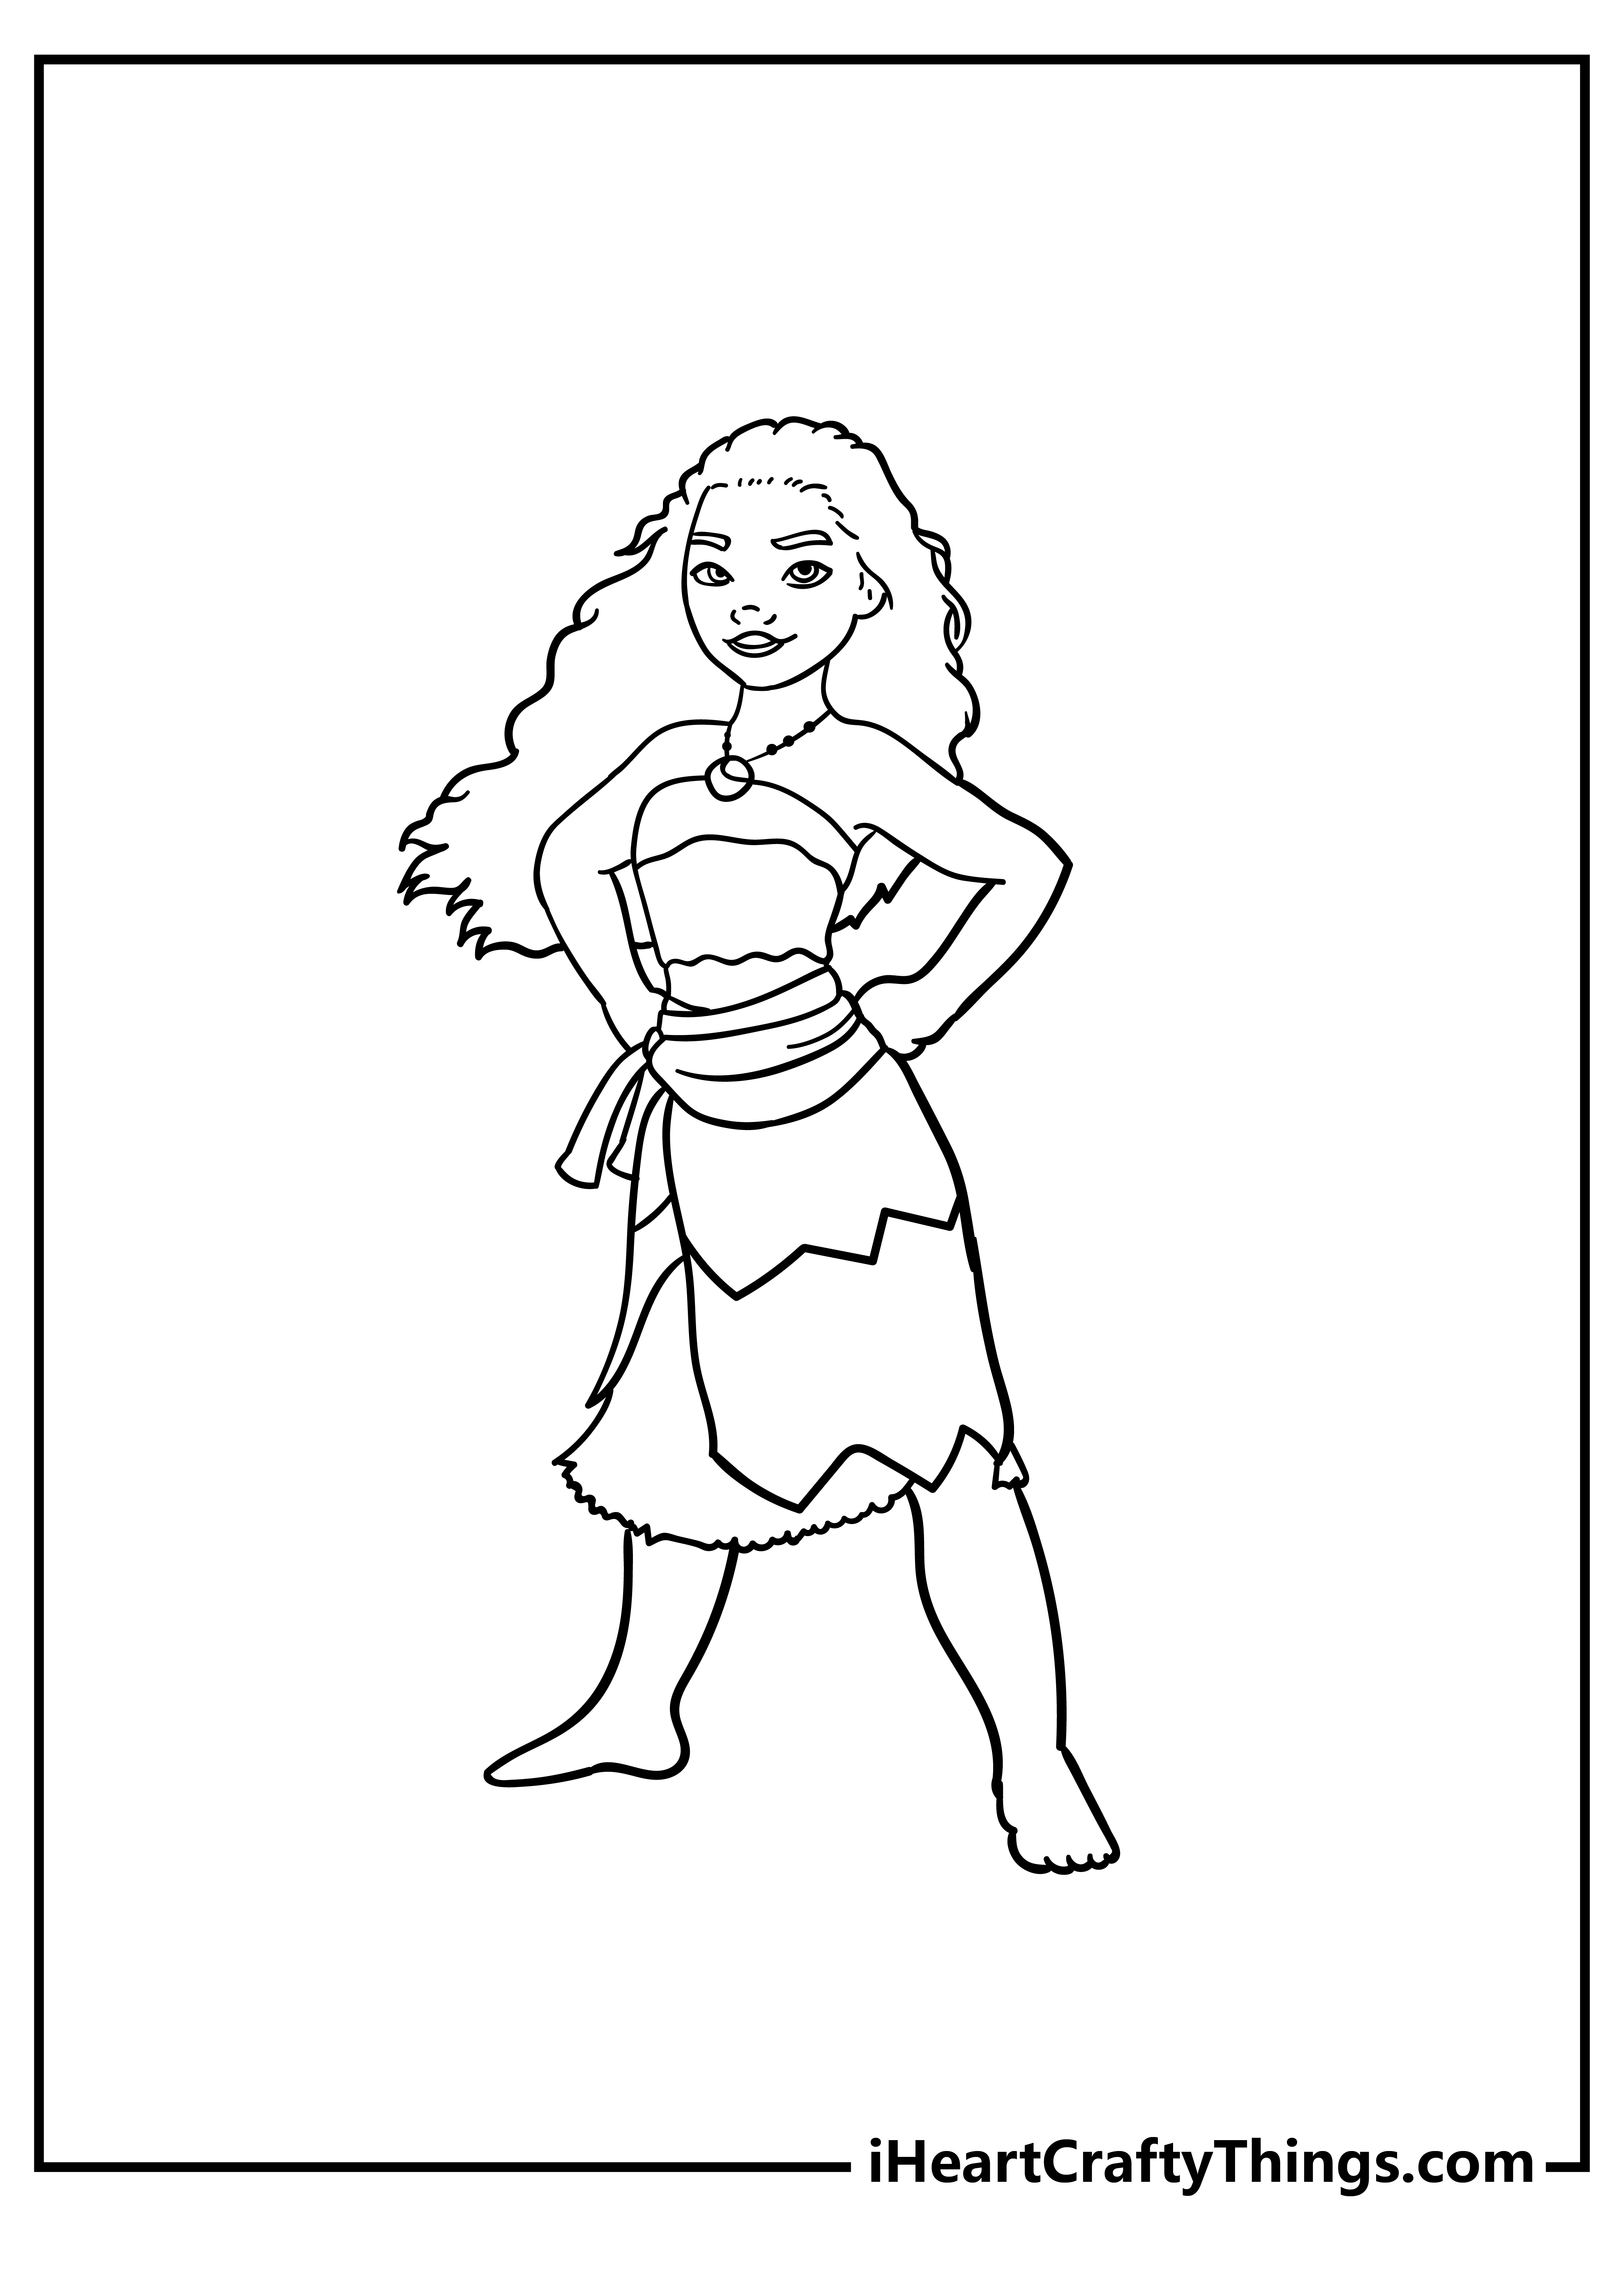 Moana Coloring Pages free pdf download